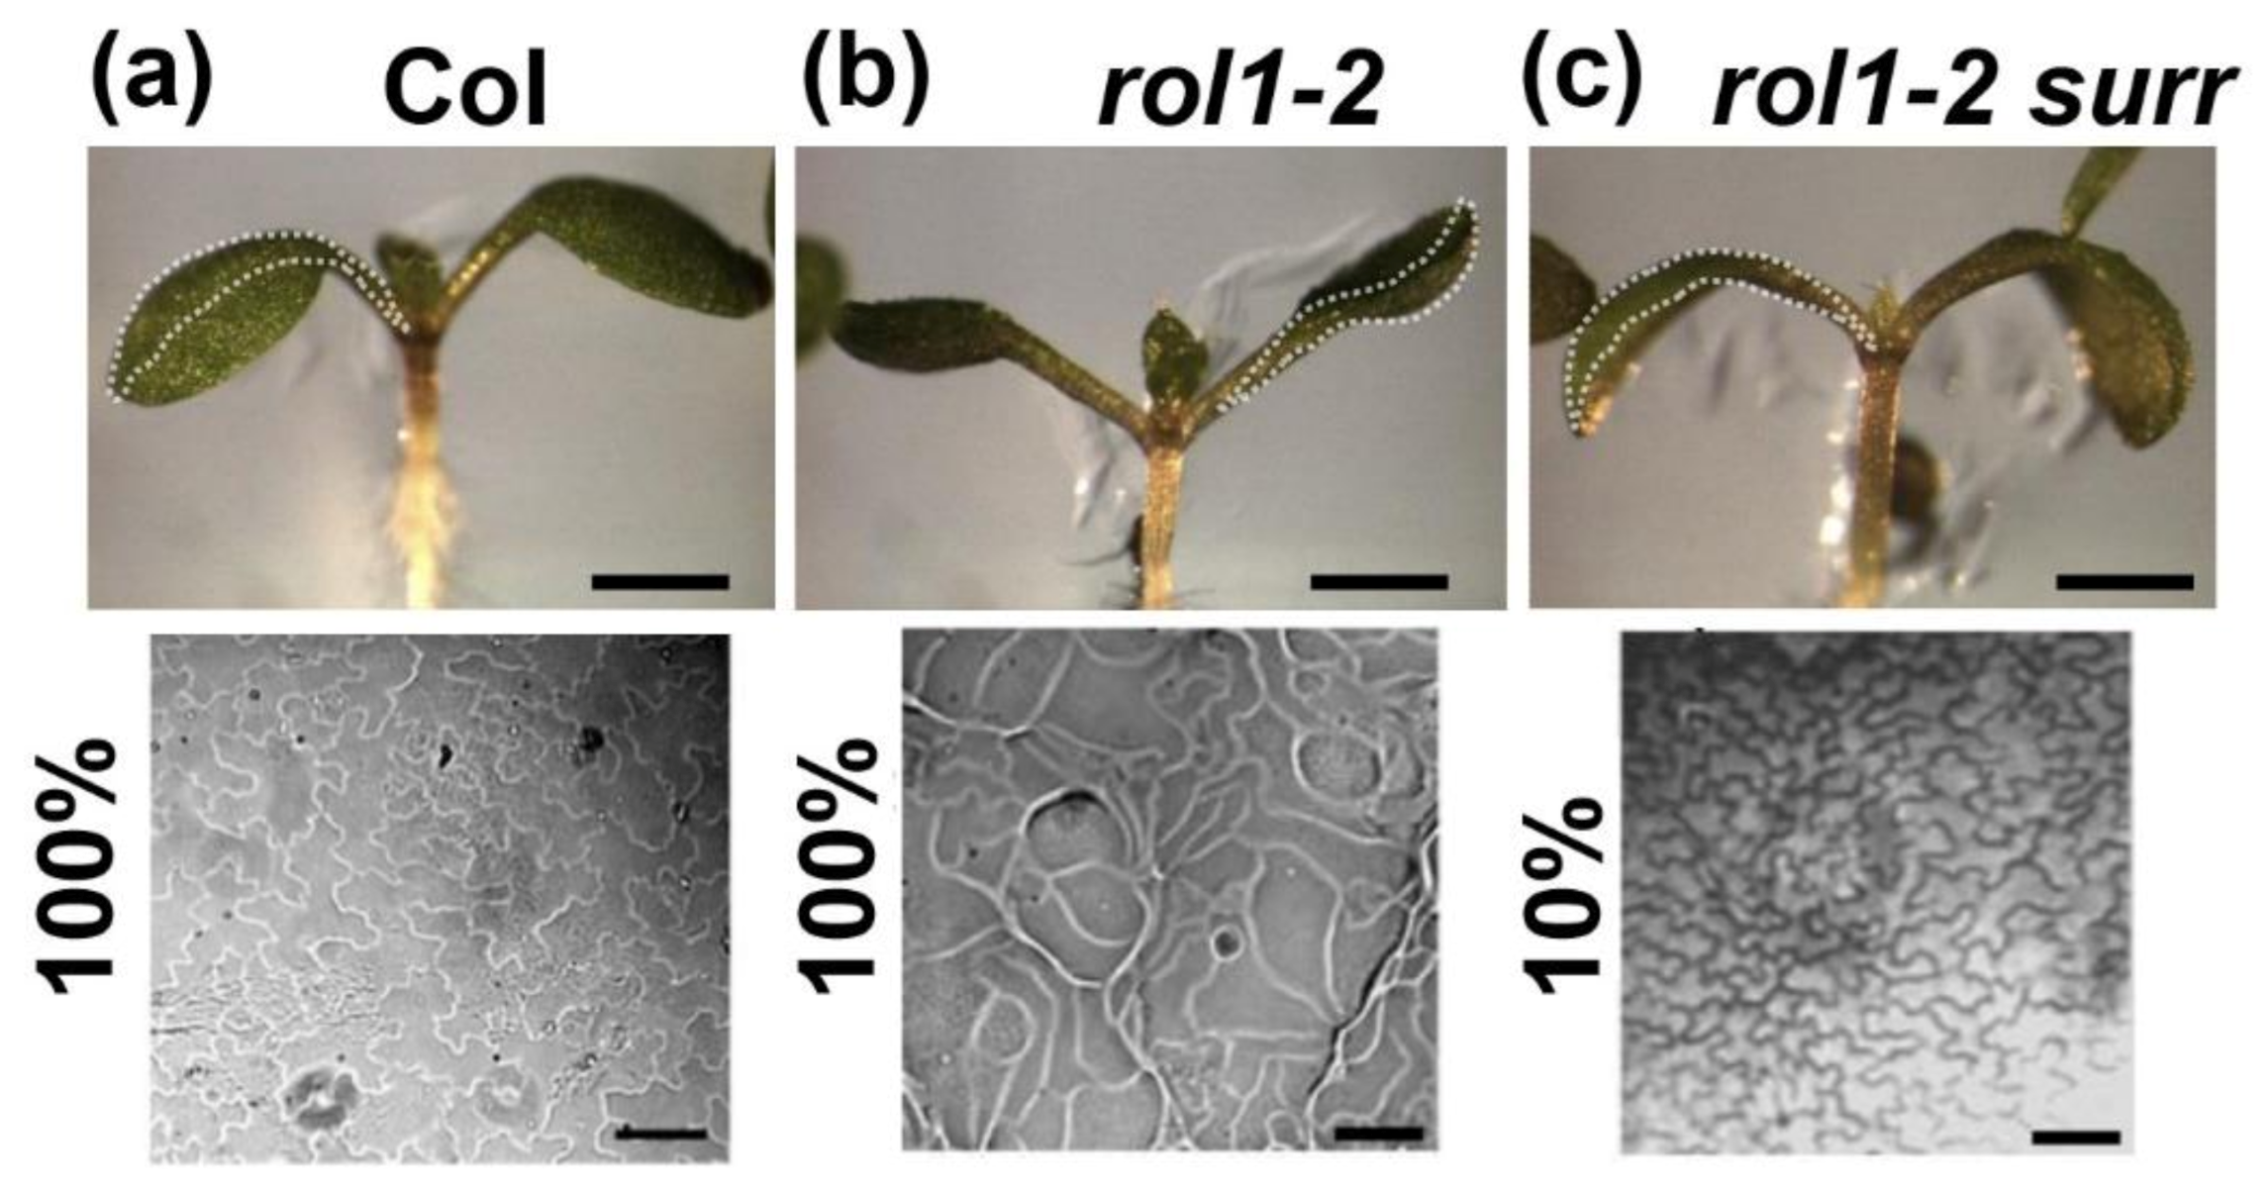 Cells Free Full Text Defects In Cell Wall Differentiation Of The Arabidopsis Mutant Rol1 2 Is Dependent On Cyclin Dependent Kinase Cdk8 Html